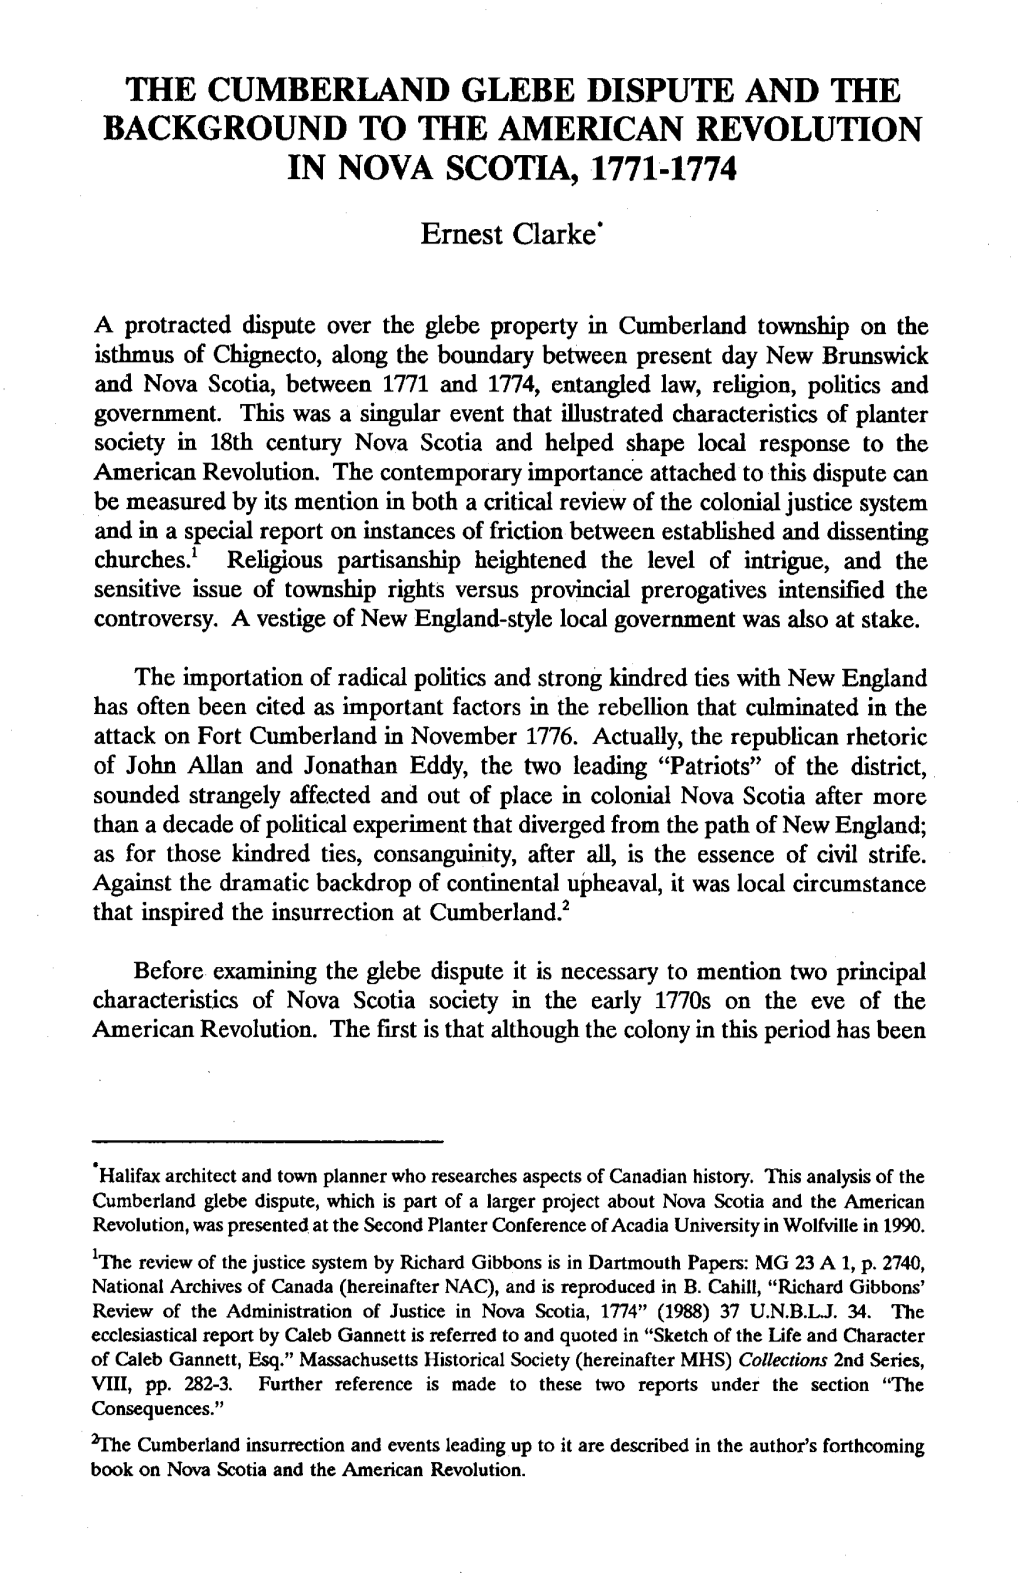 The Cumberland Glebe Dispute and the Background to the American Revolution in Nova Scotia, 1771-1774